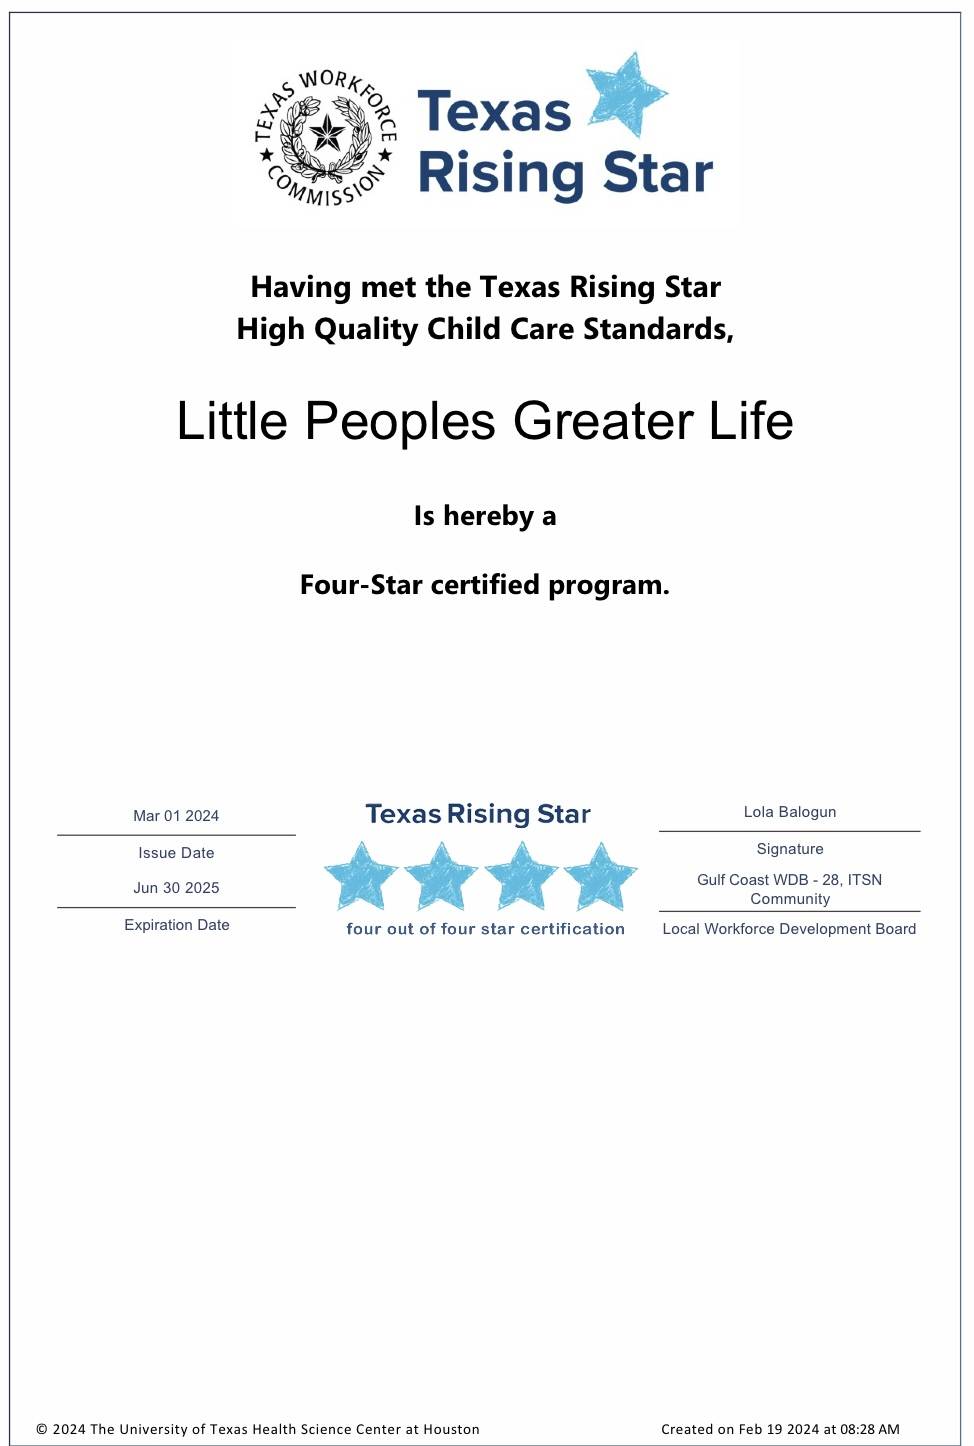 Little People's Greater Life Daycare in Webster, League City, Clear Lake Texas